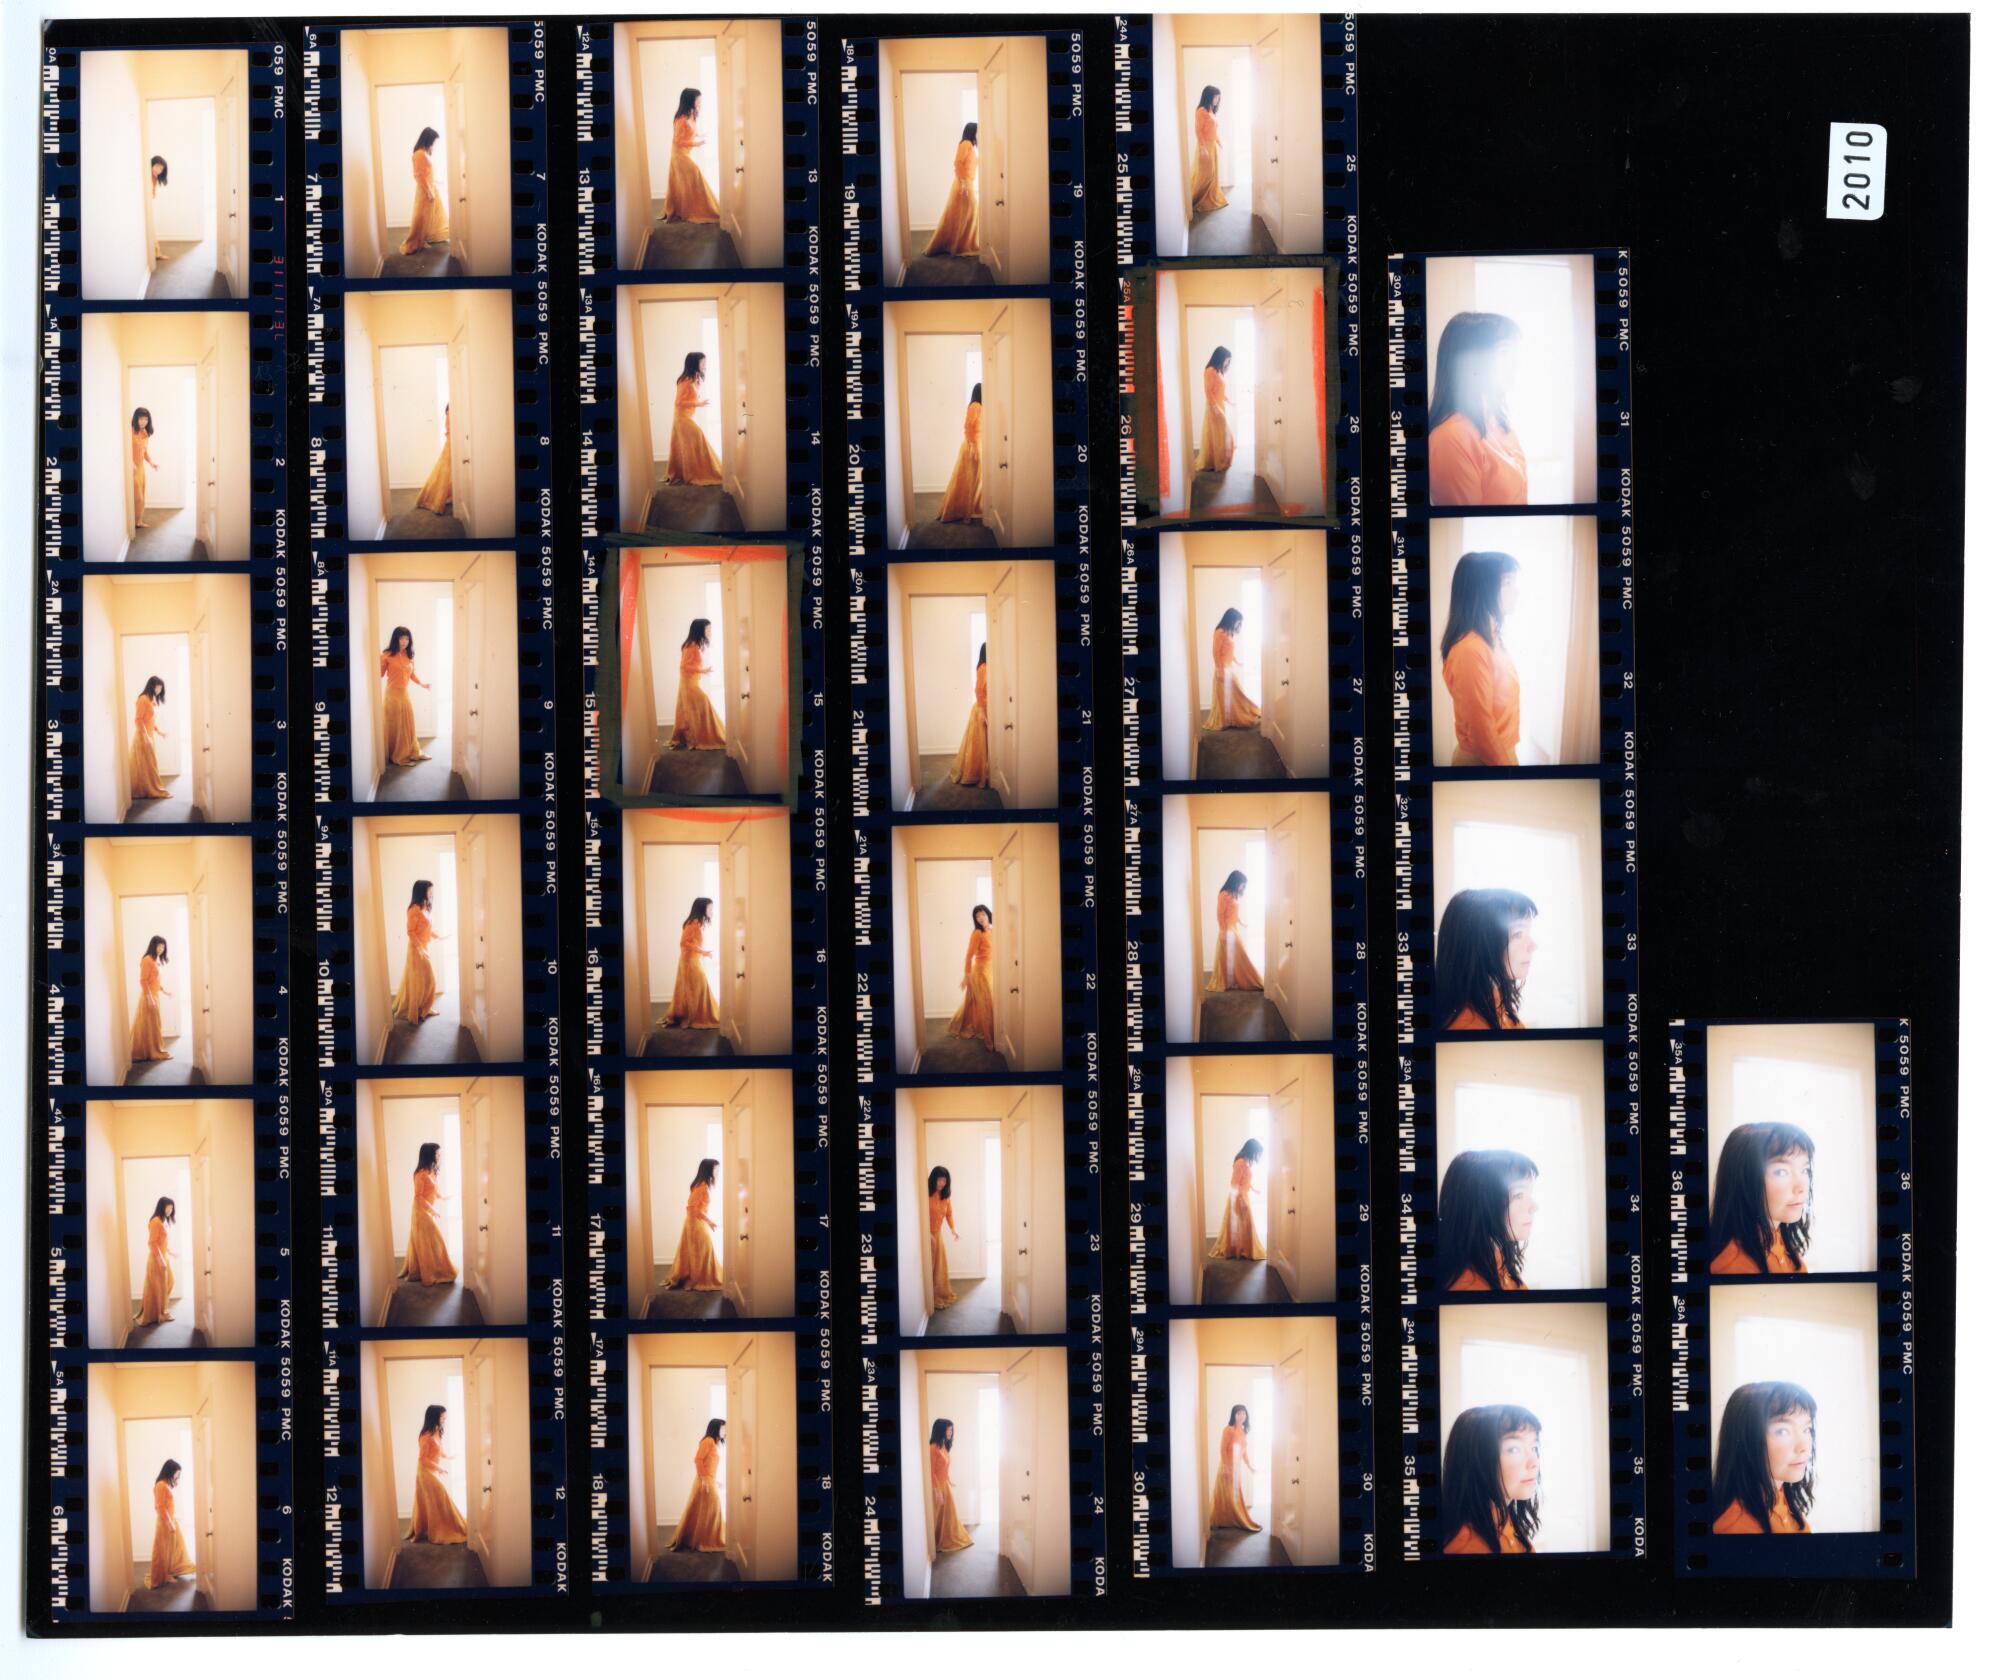 A contact sheet of photos of Bj?rk in a hallway.